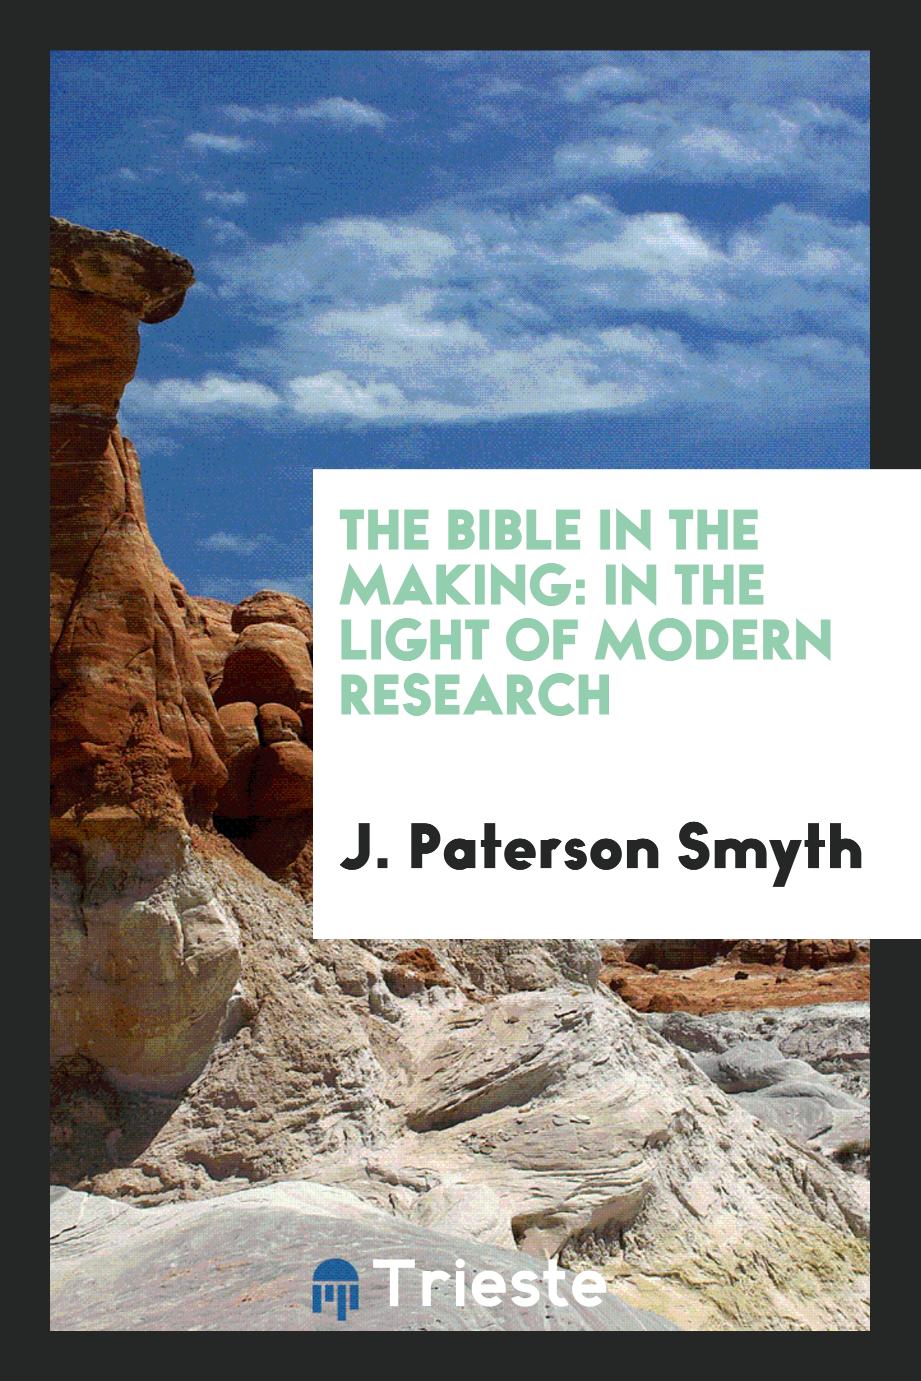 The Bible in the making: in the light of modern research